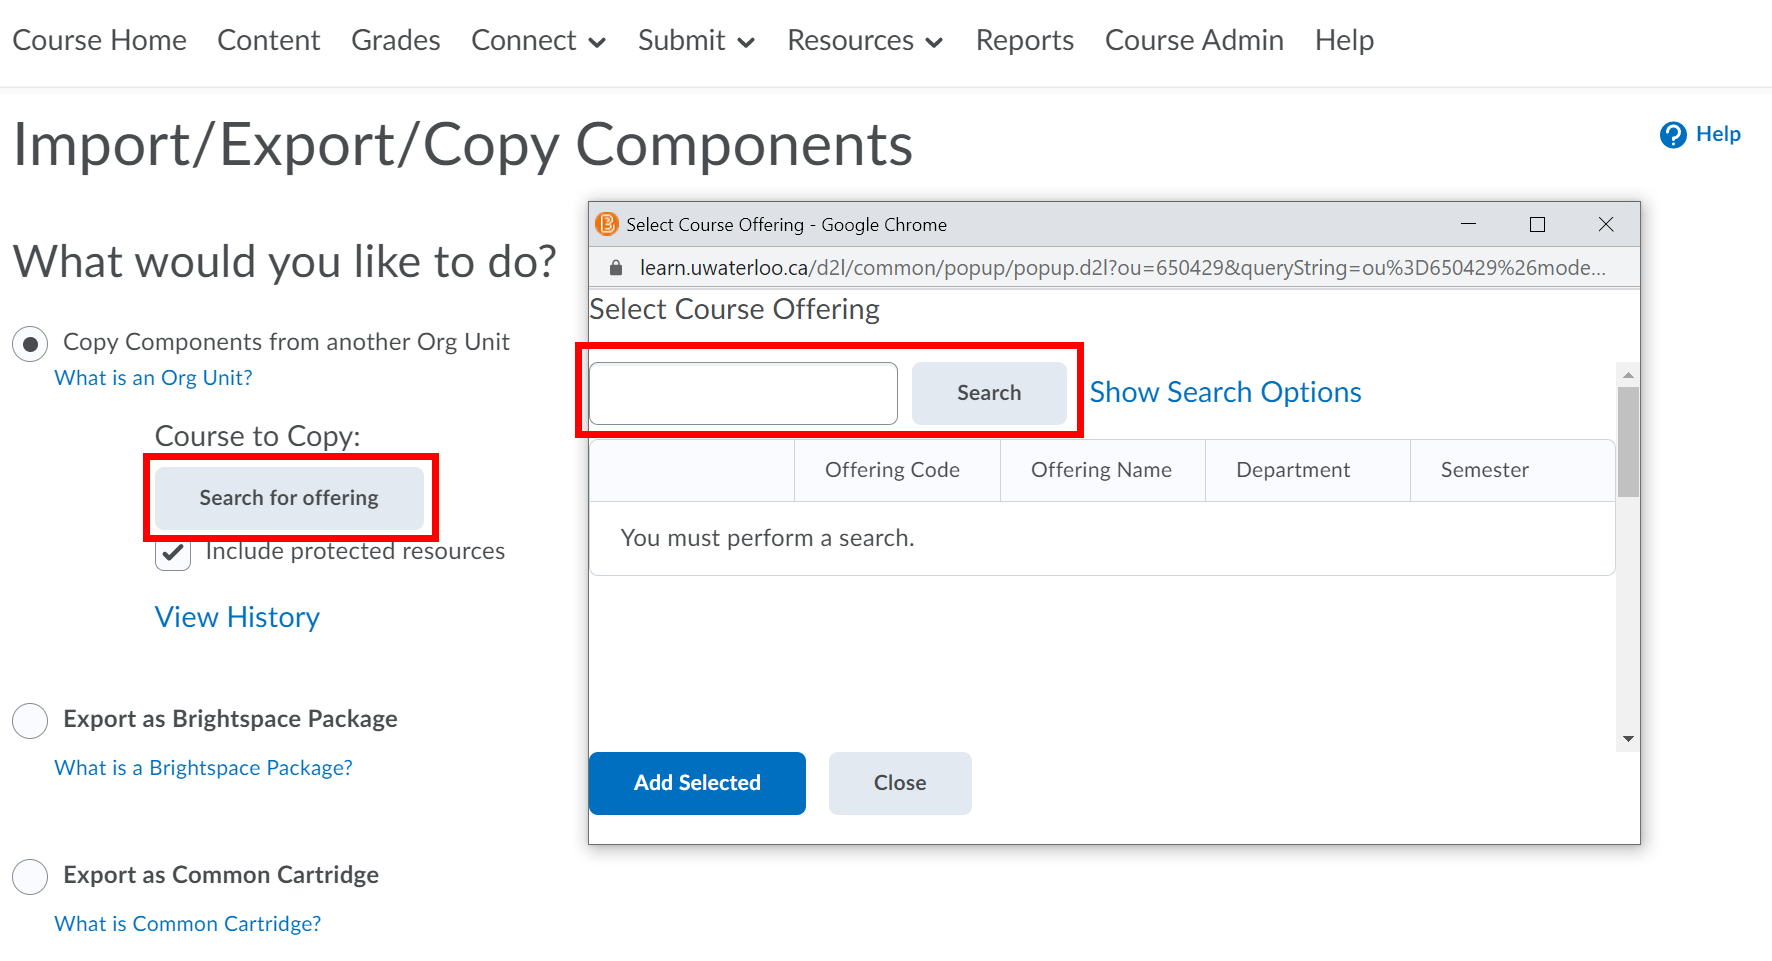 Search for offering button highlighted on Import Export Copy Components. Select Course Offering window with the Search bar highlighted.